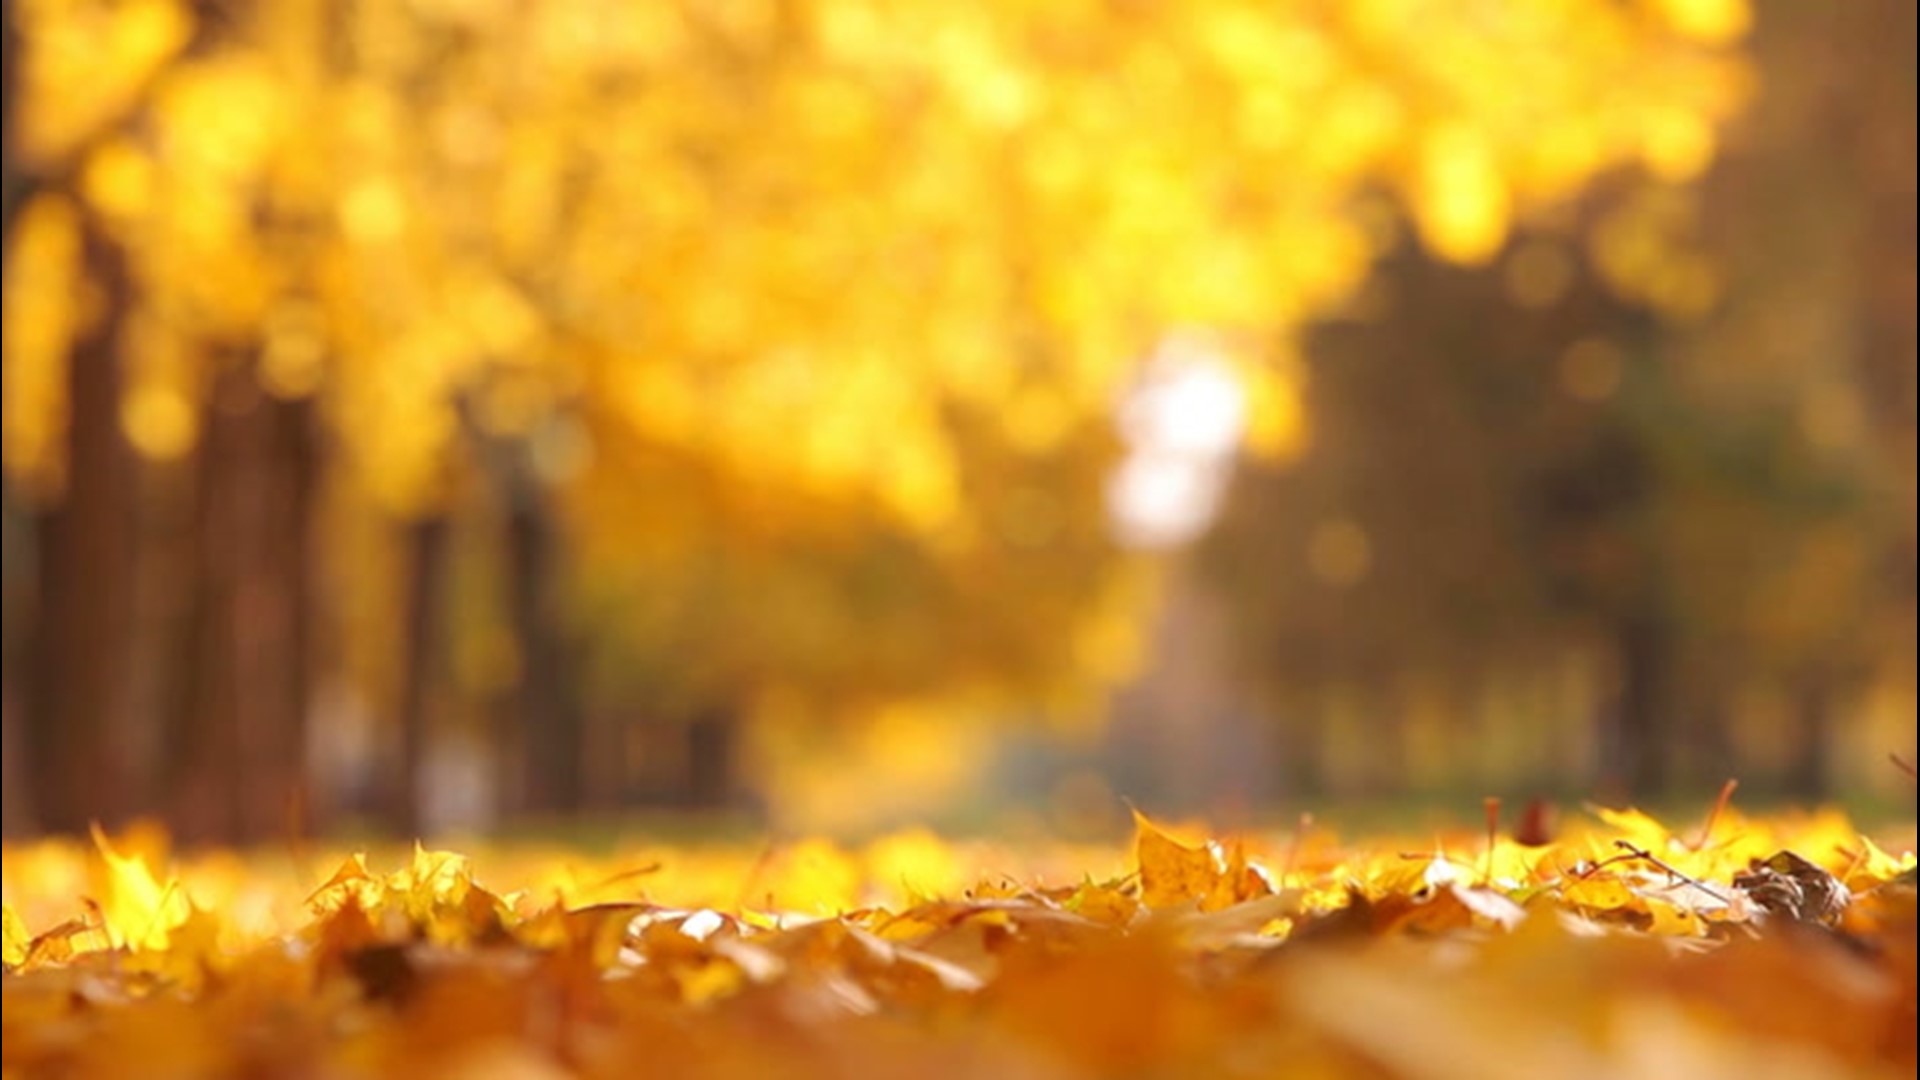 We bet you don't know all of these 10 things about the first day of fall